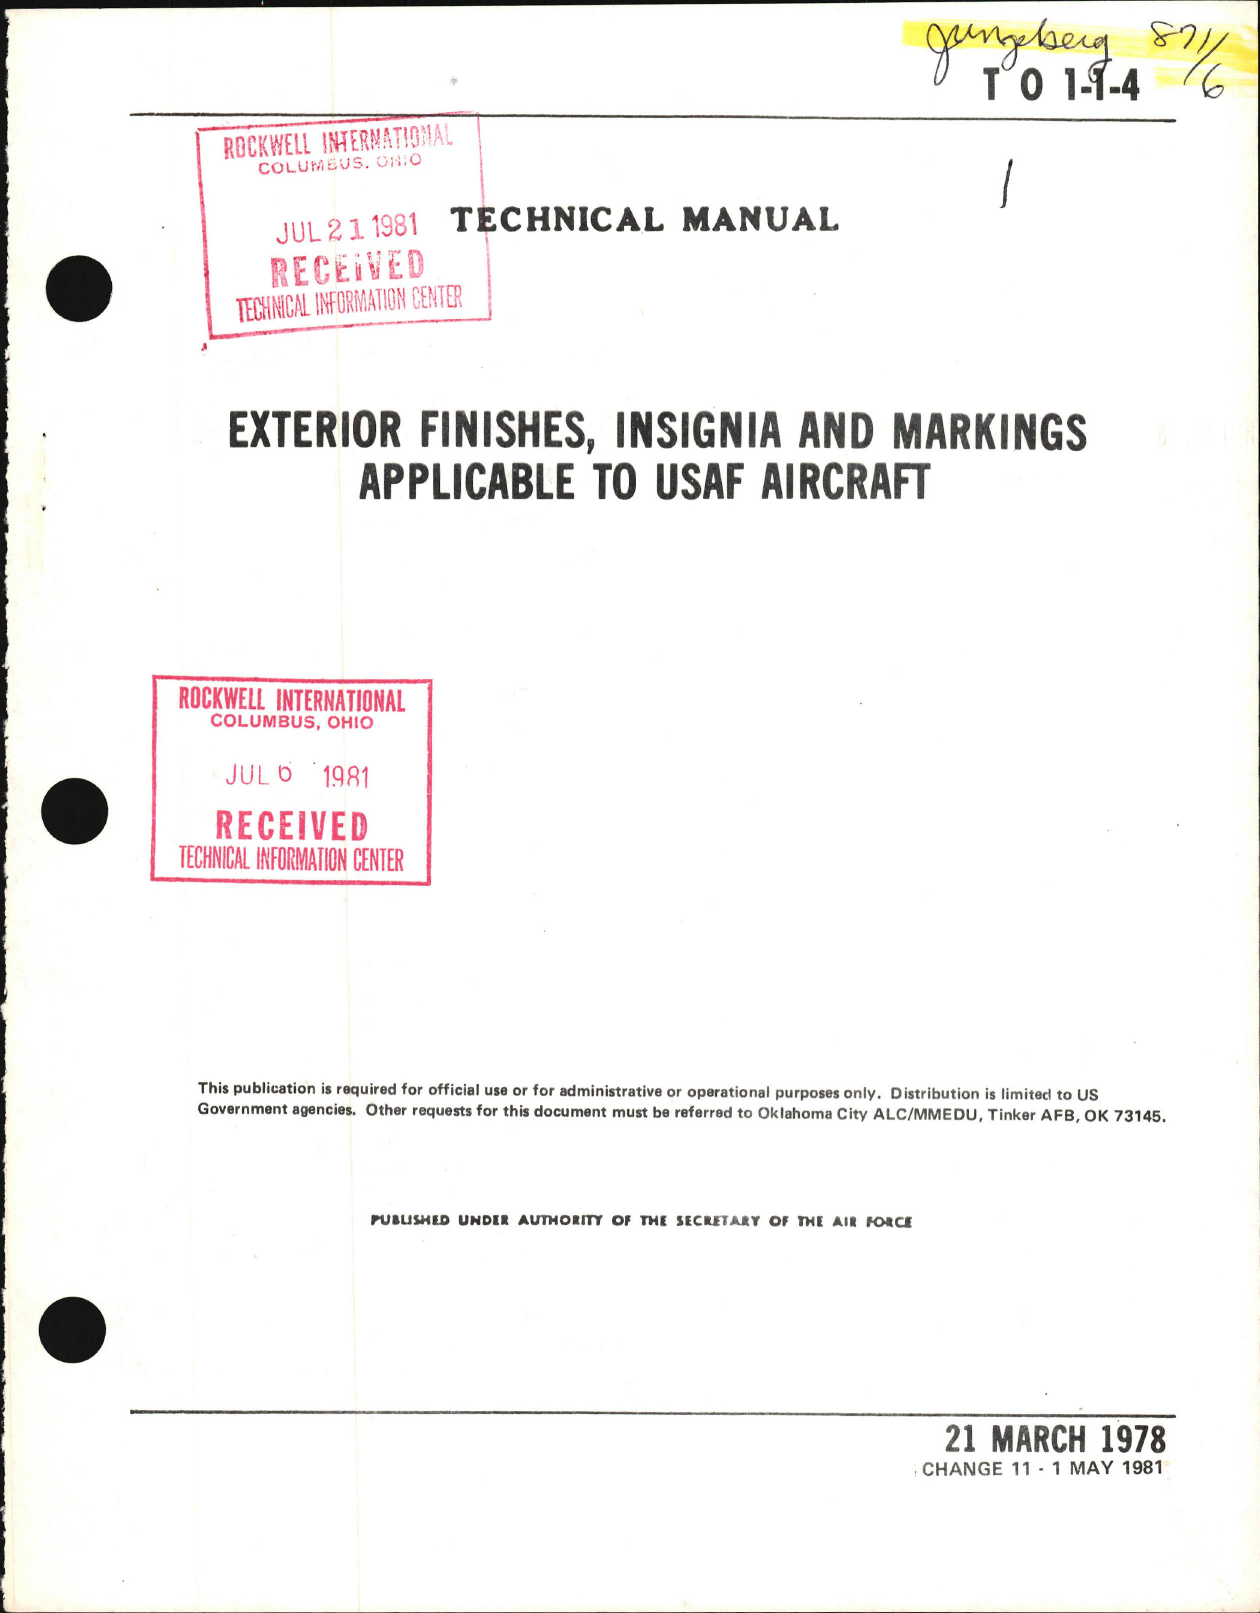 Sample page 1 from AirCorps Library document: Exterior Finishes, Insignia and Markings for USAF Aircraft - Change - 11